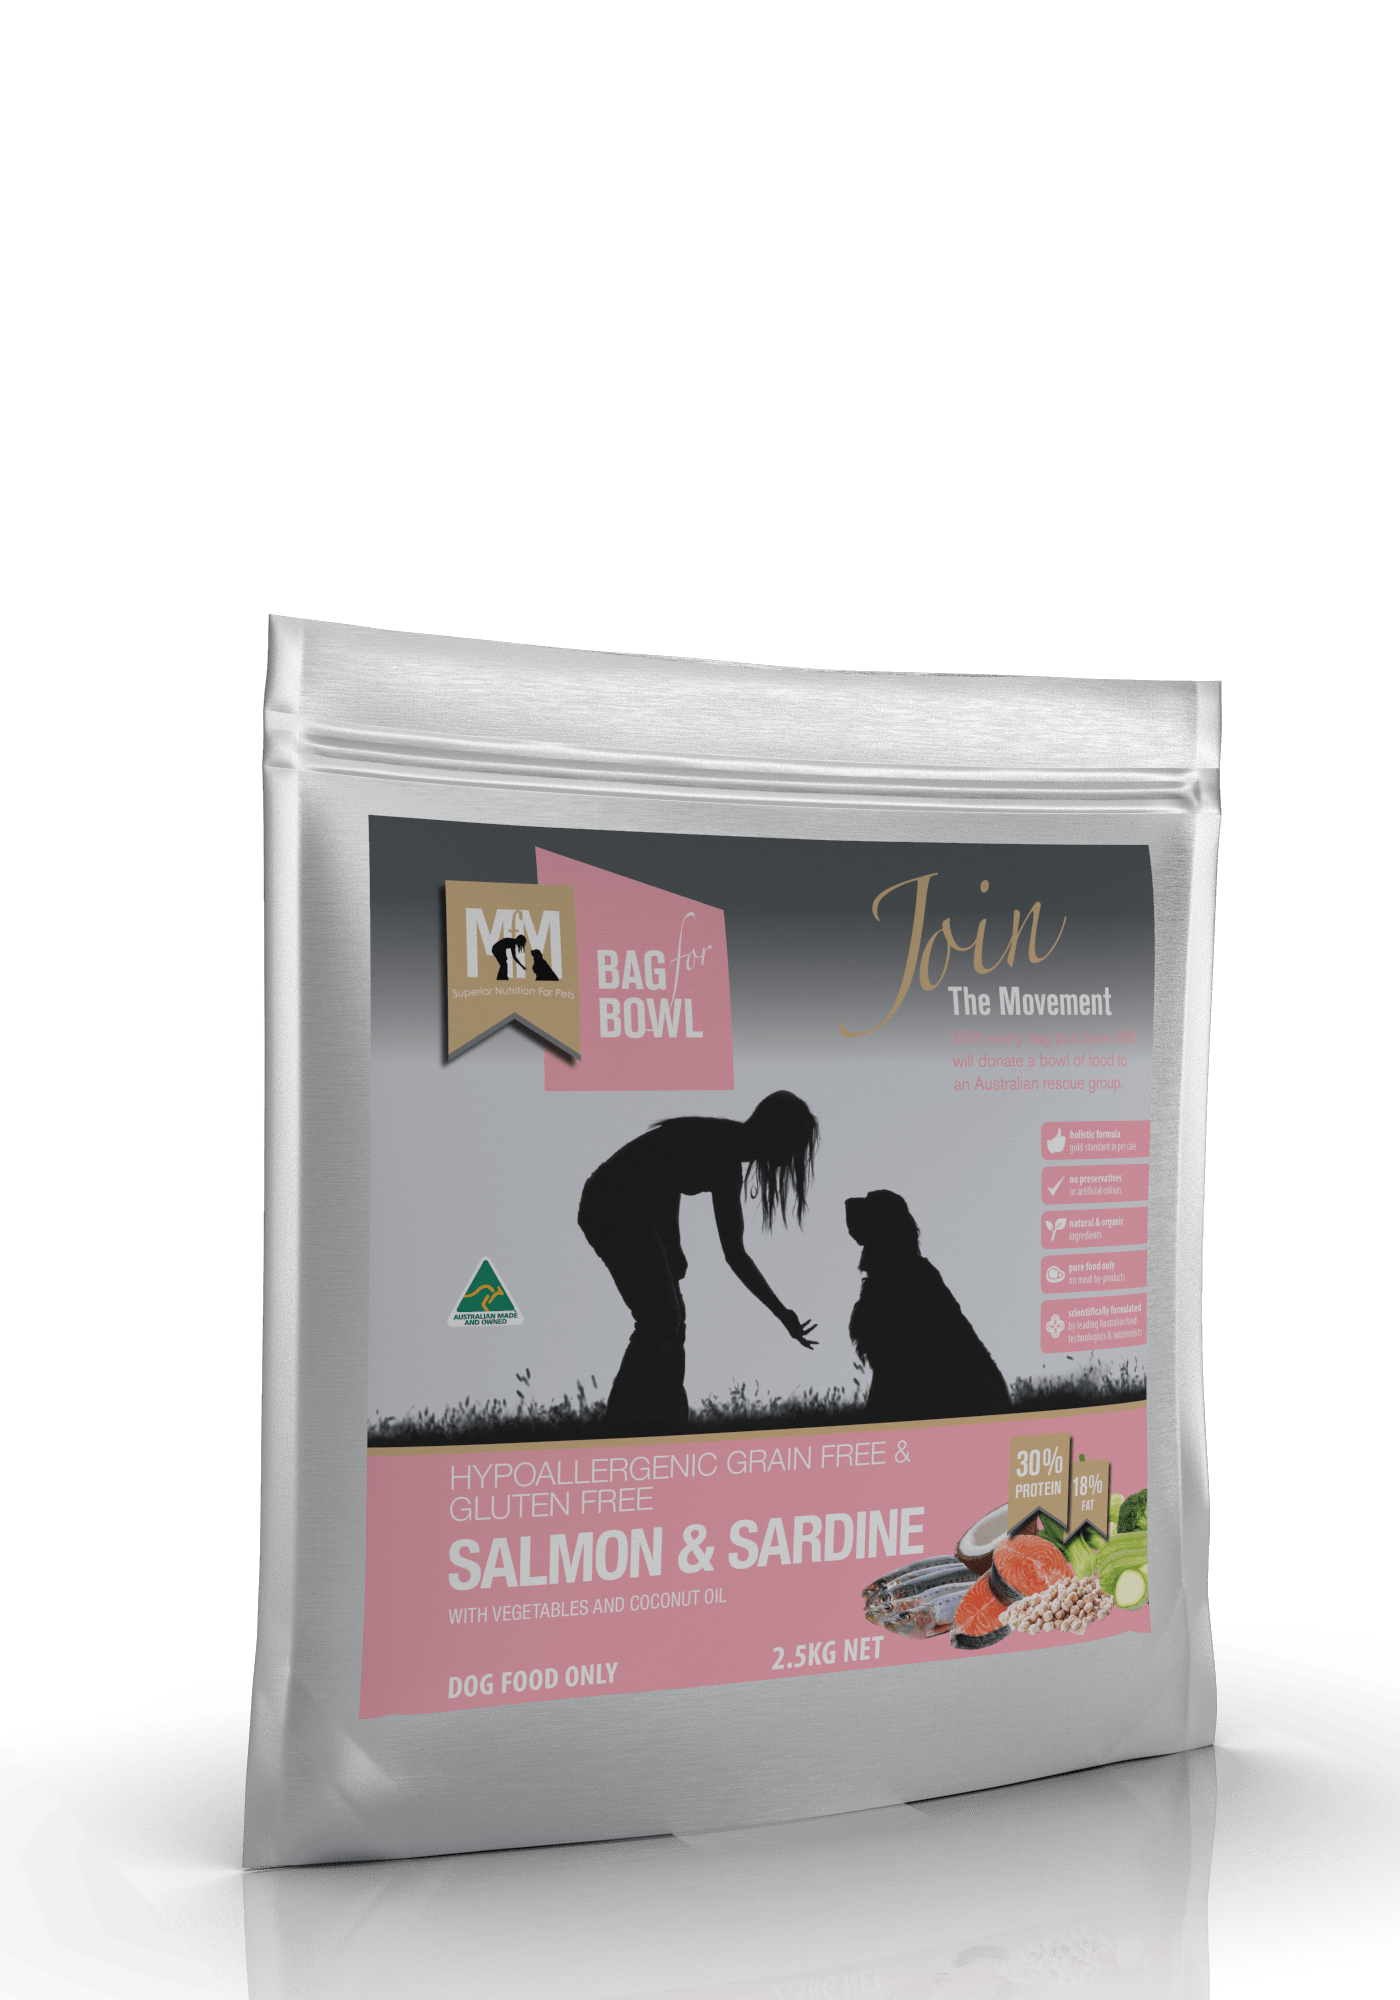 Meals For Mutts Dog Dry Food Default Meals For Mutts Dog Grain Free Salmon & Sardine 2.5Kg